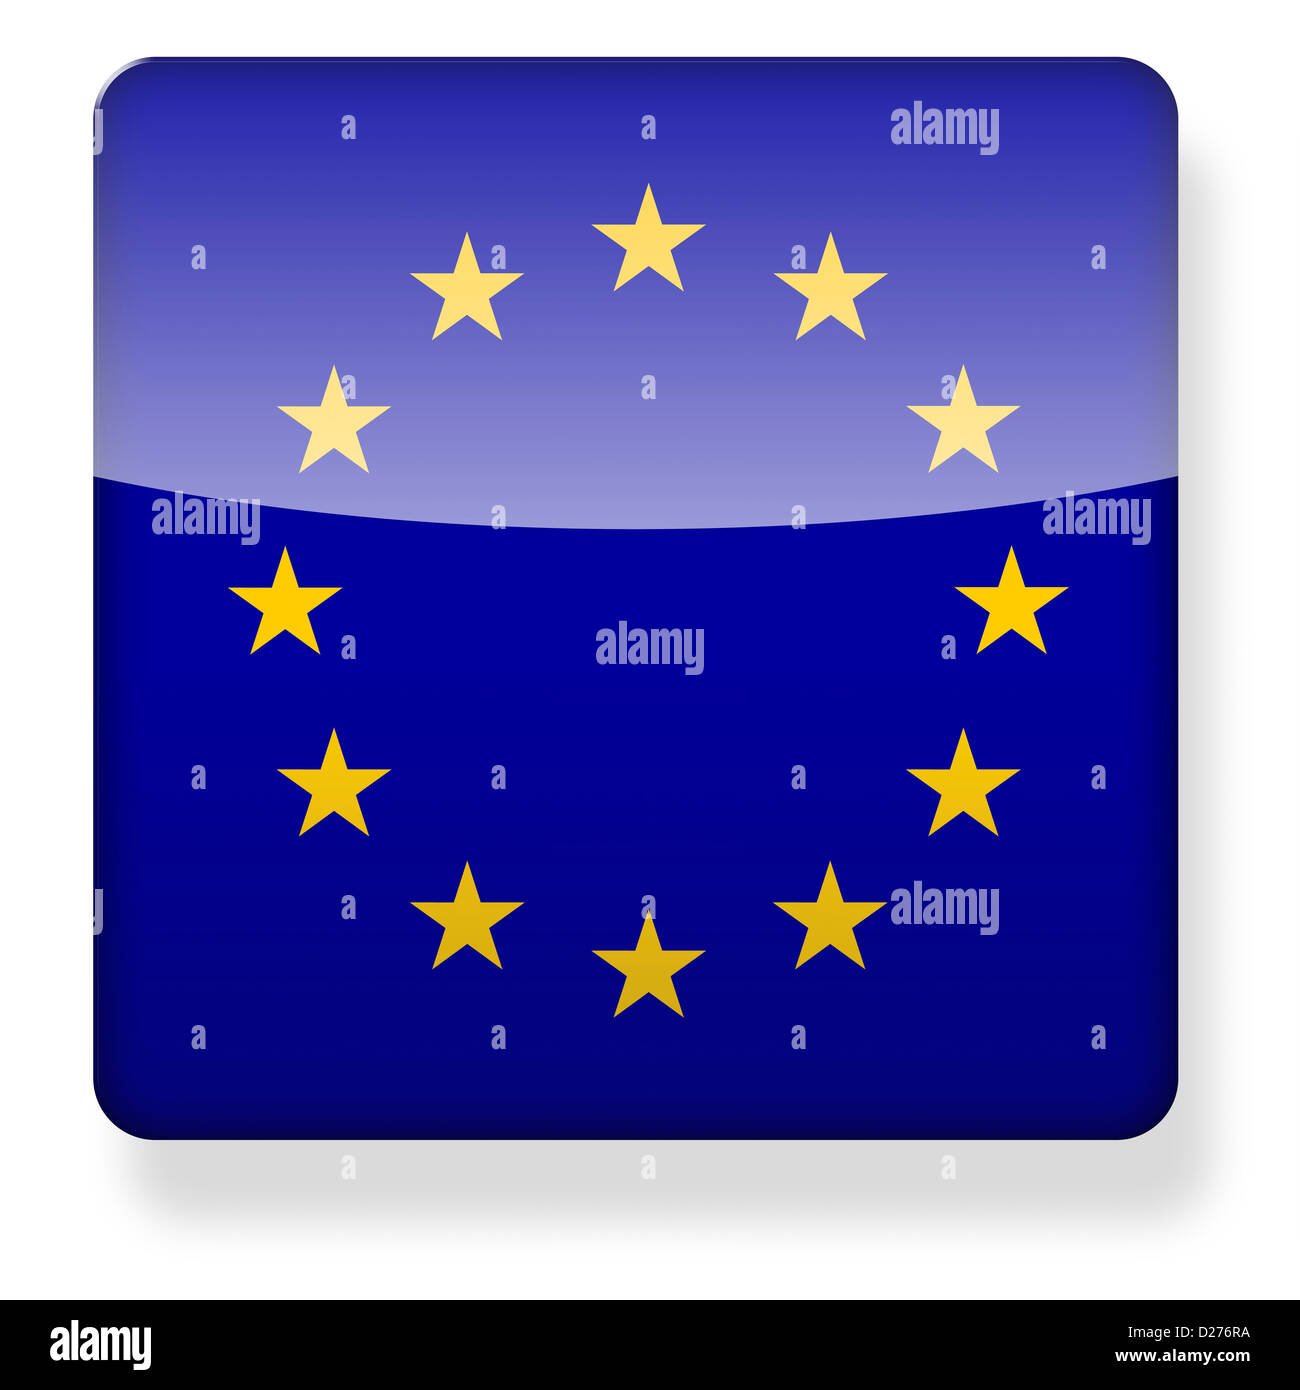 EU flag as an app icon. Clipping path included. Stock Photo